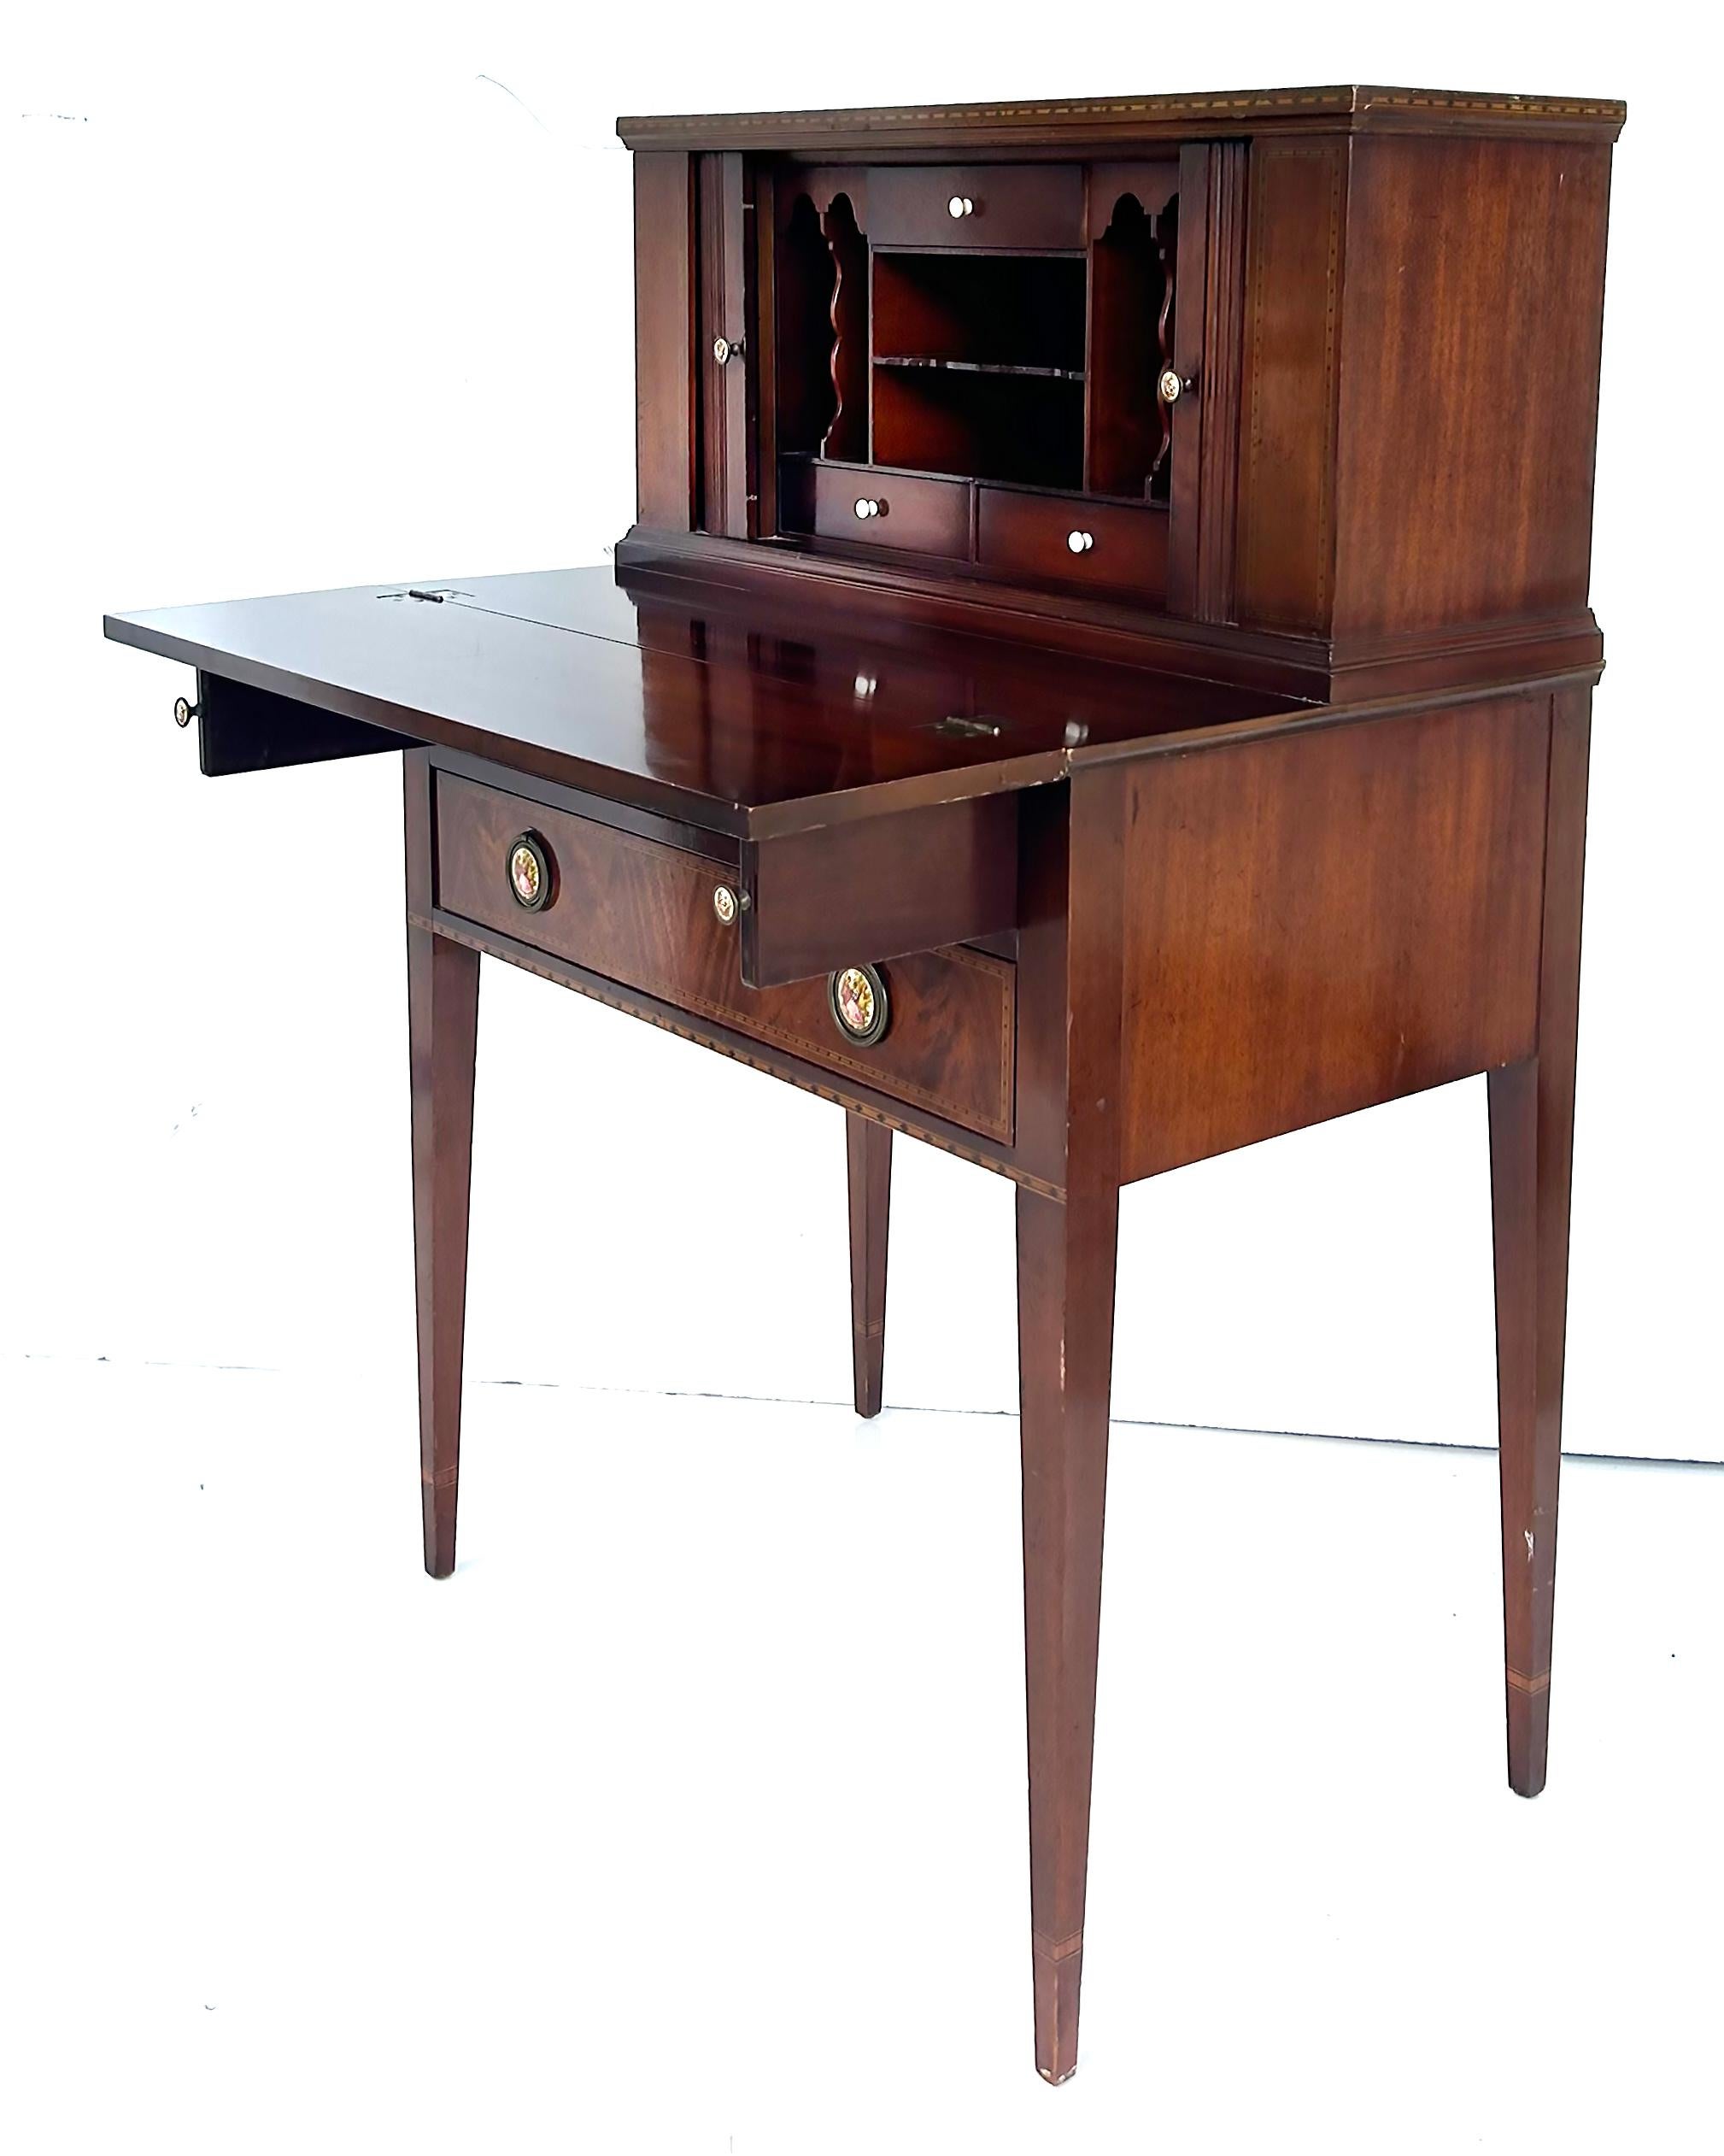 20th Century 1960s Lady's Writing Desk Secretaire, Tambour Doors, Marquetry Banded Drawers